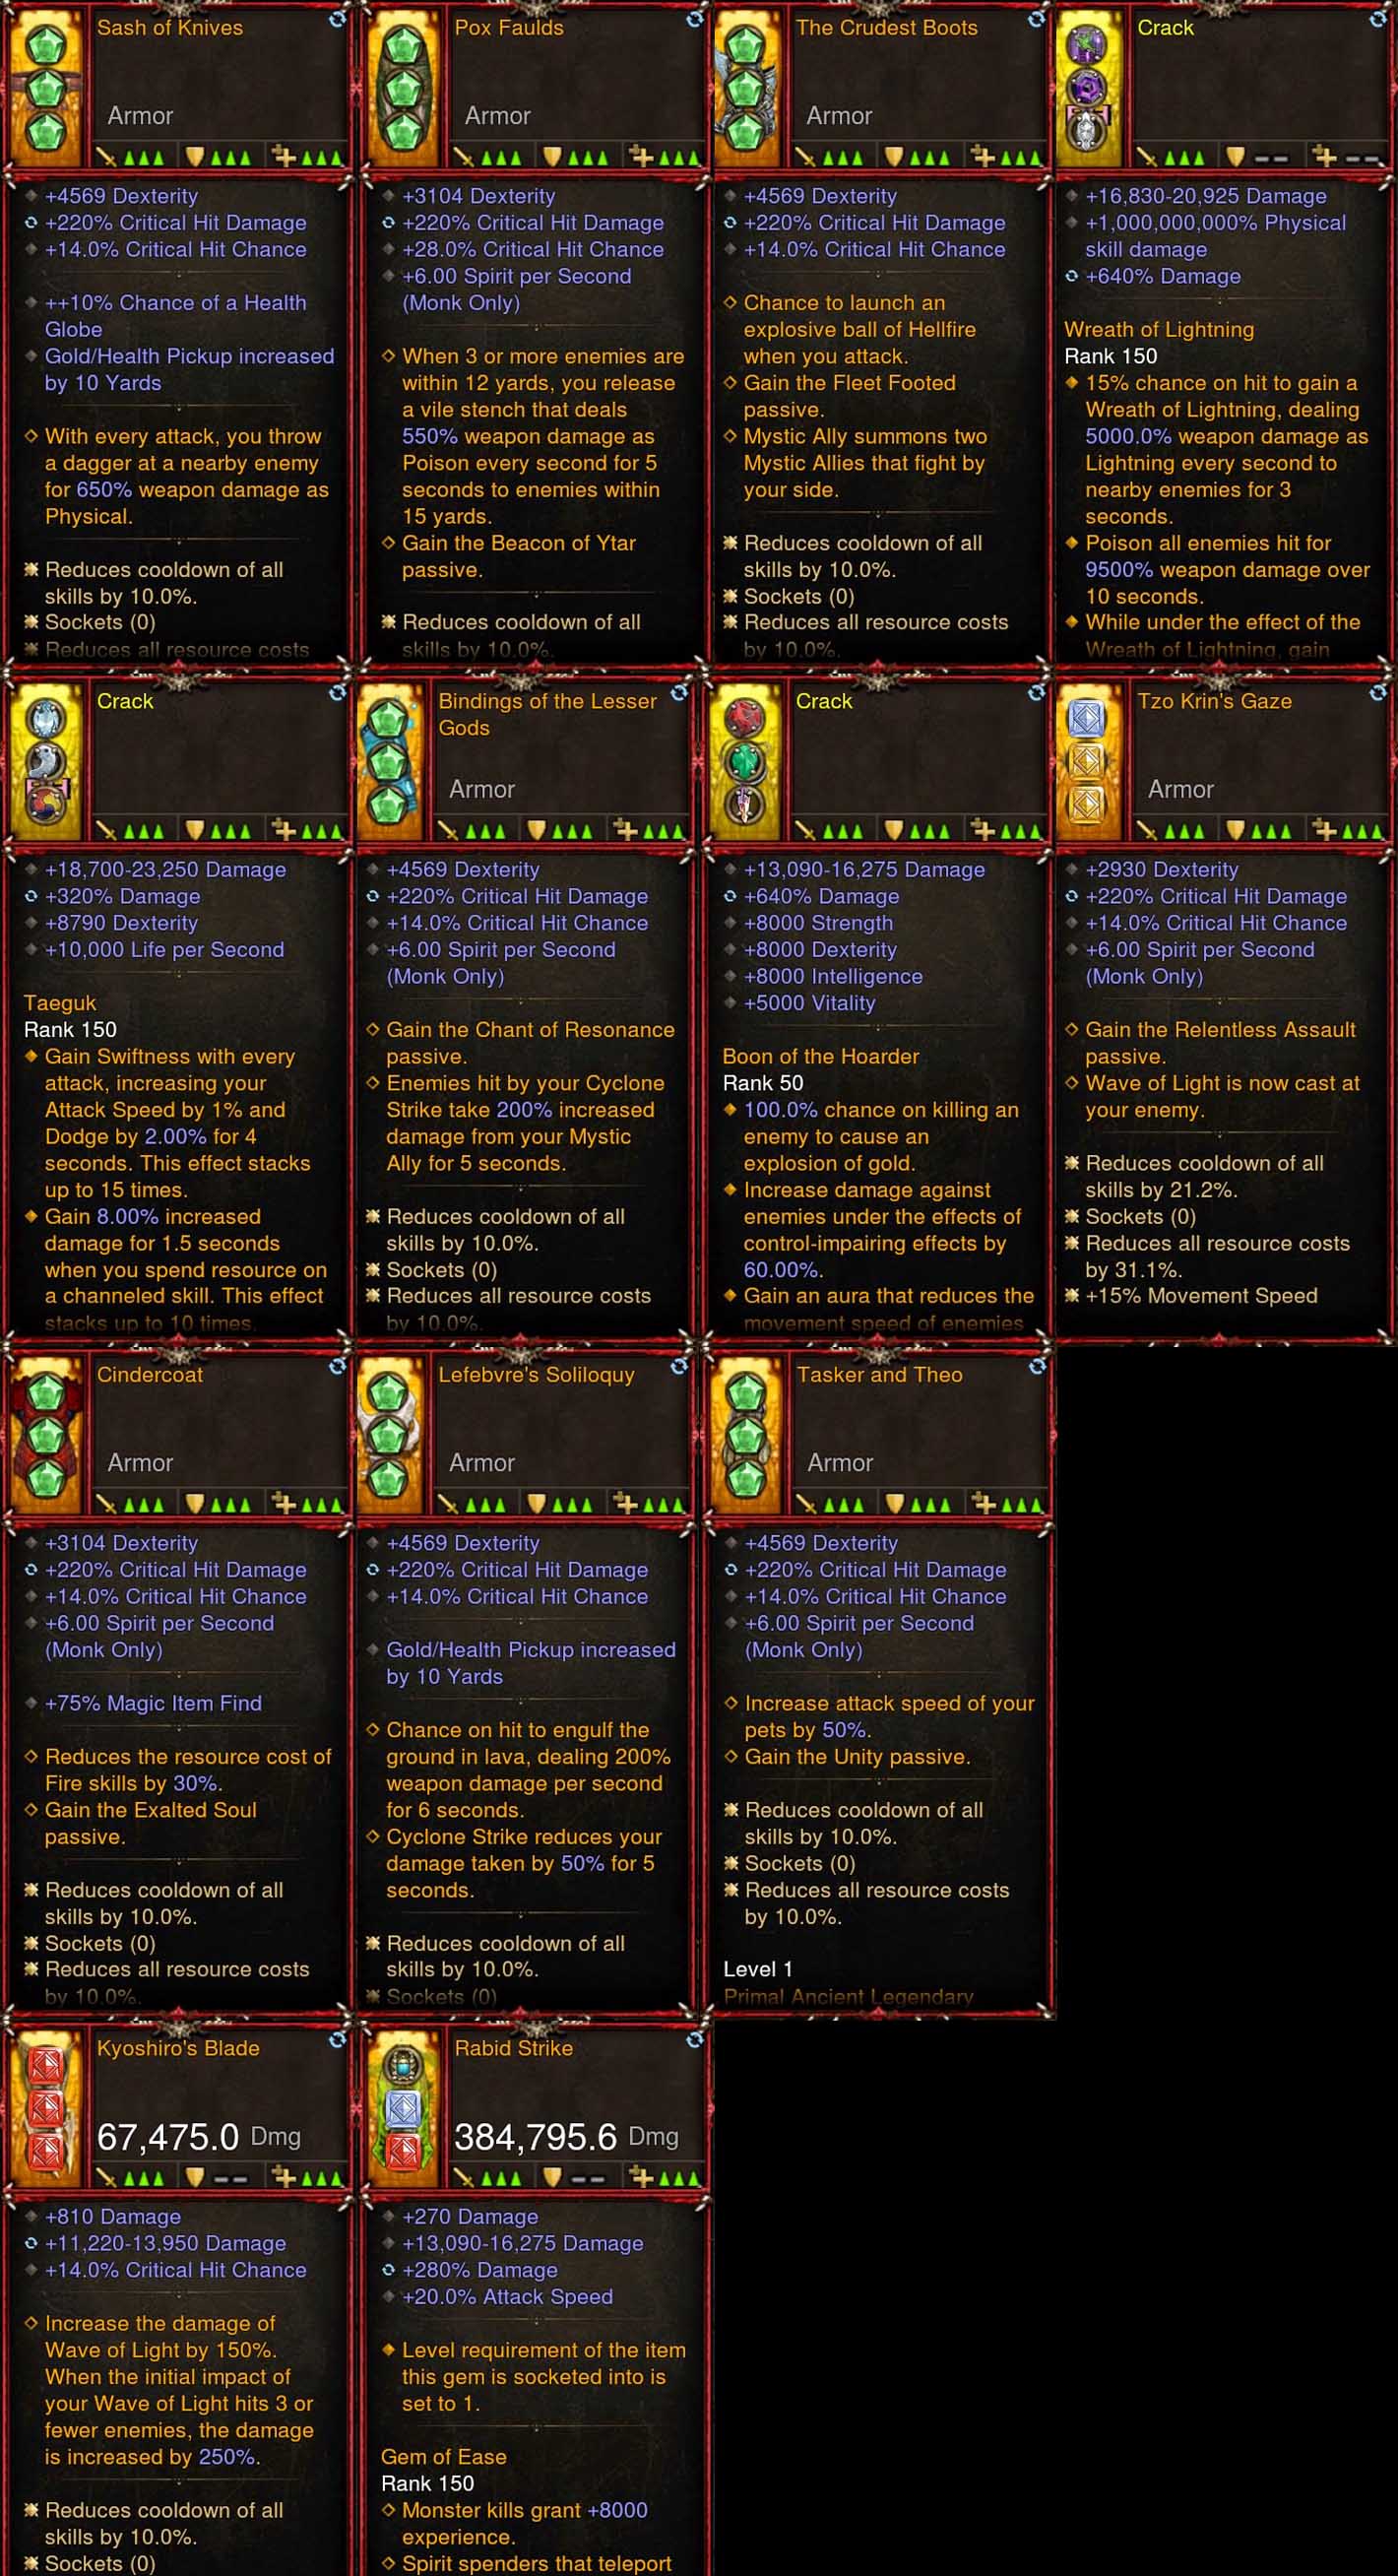 [Primal Ancient] 1-70 Legacy of Dreams Legendary Monk Set Diablo 3 Mods ROS Seasonal and Non Seasonal Save Mod - Modded Items and Gear - Hacks - Cheats - Trainers for Playstation 4 - Playstation 5 - Nintendo Switch - Xbox One